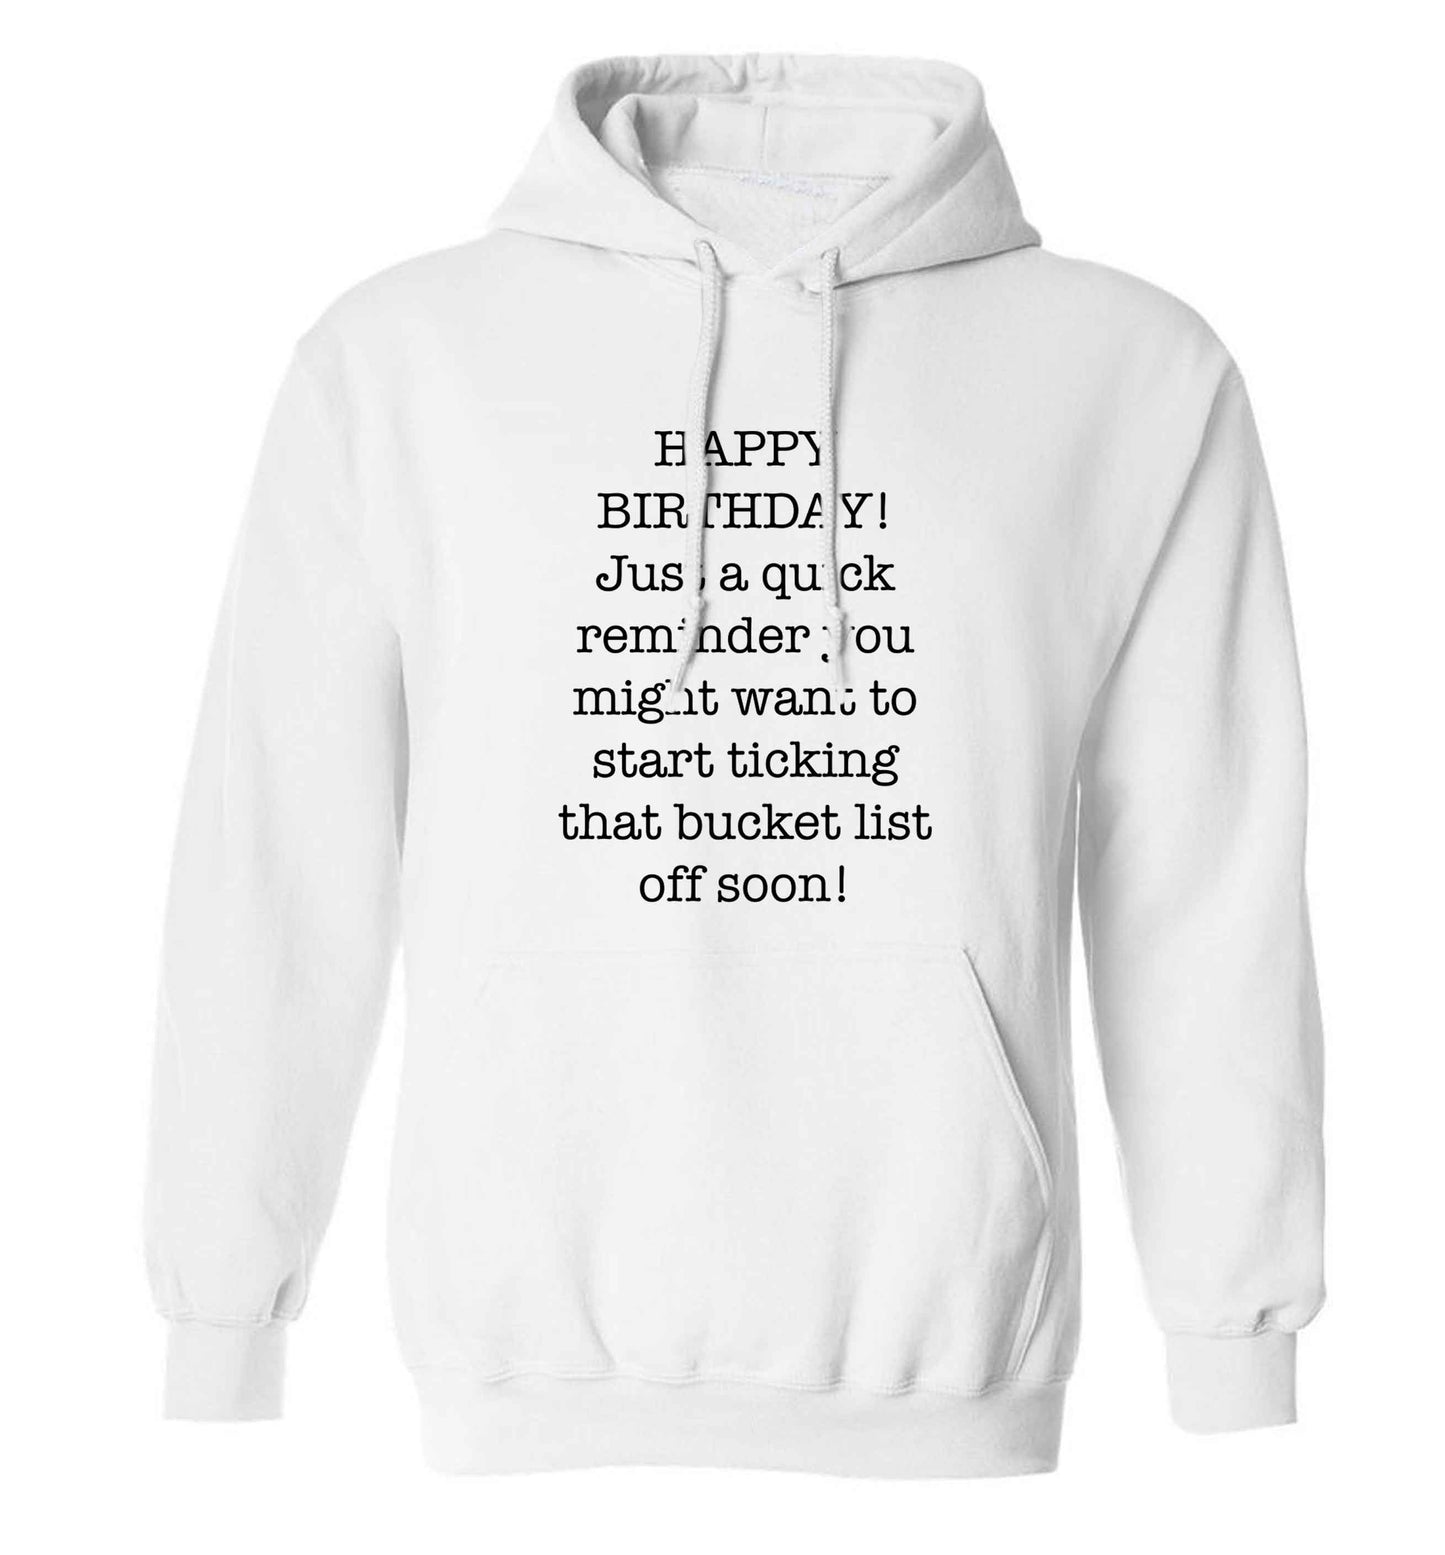 Happy birthday, just a quick reminder you might want to start ticking that bucket list off soon adults unisex white hoodie 2XL